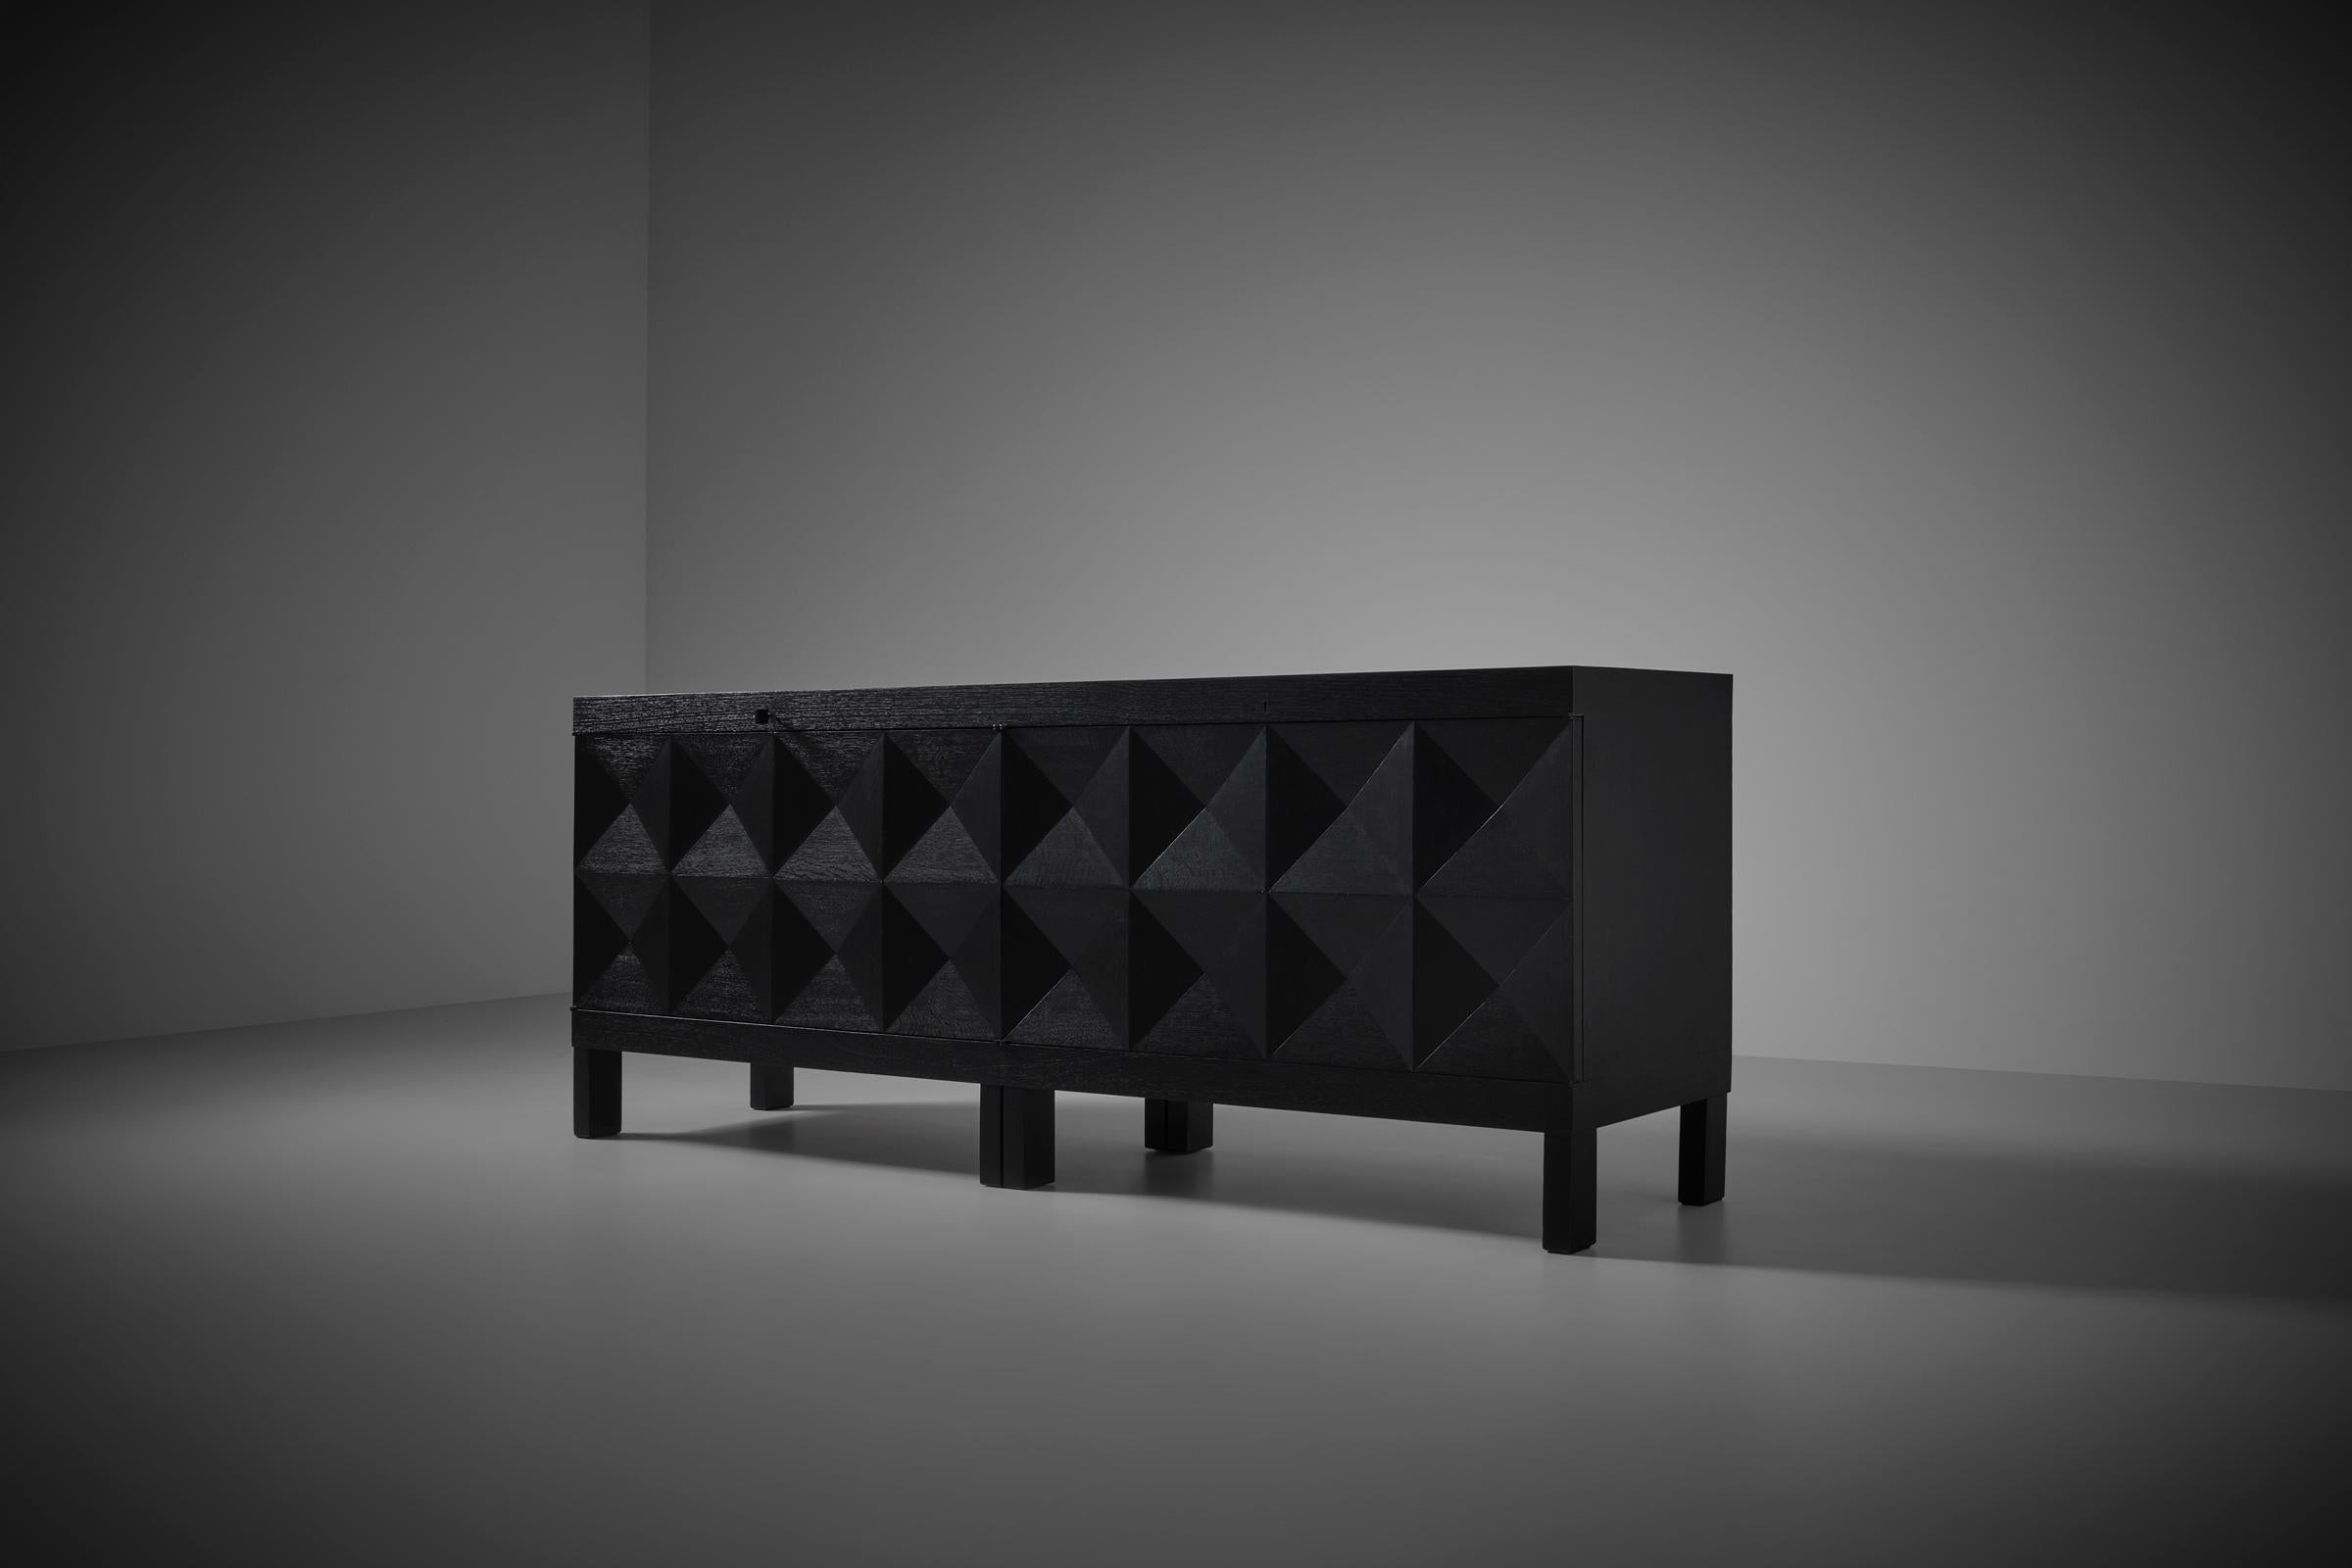 Stunning Brutalist sideboard by J. Batenburg For MI, Belgium ca. 1969. High quality production and one of the nicest models in this graphic brutalist genre. Made out of black stained Oak with a beautiful outspoken grain. The repeating op-art design